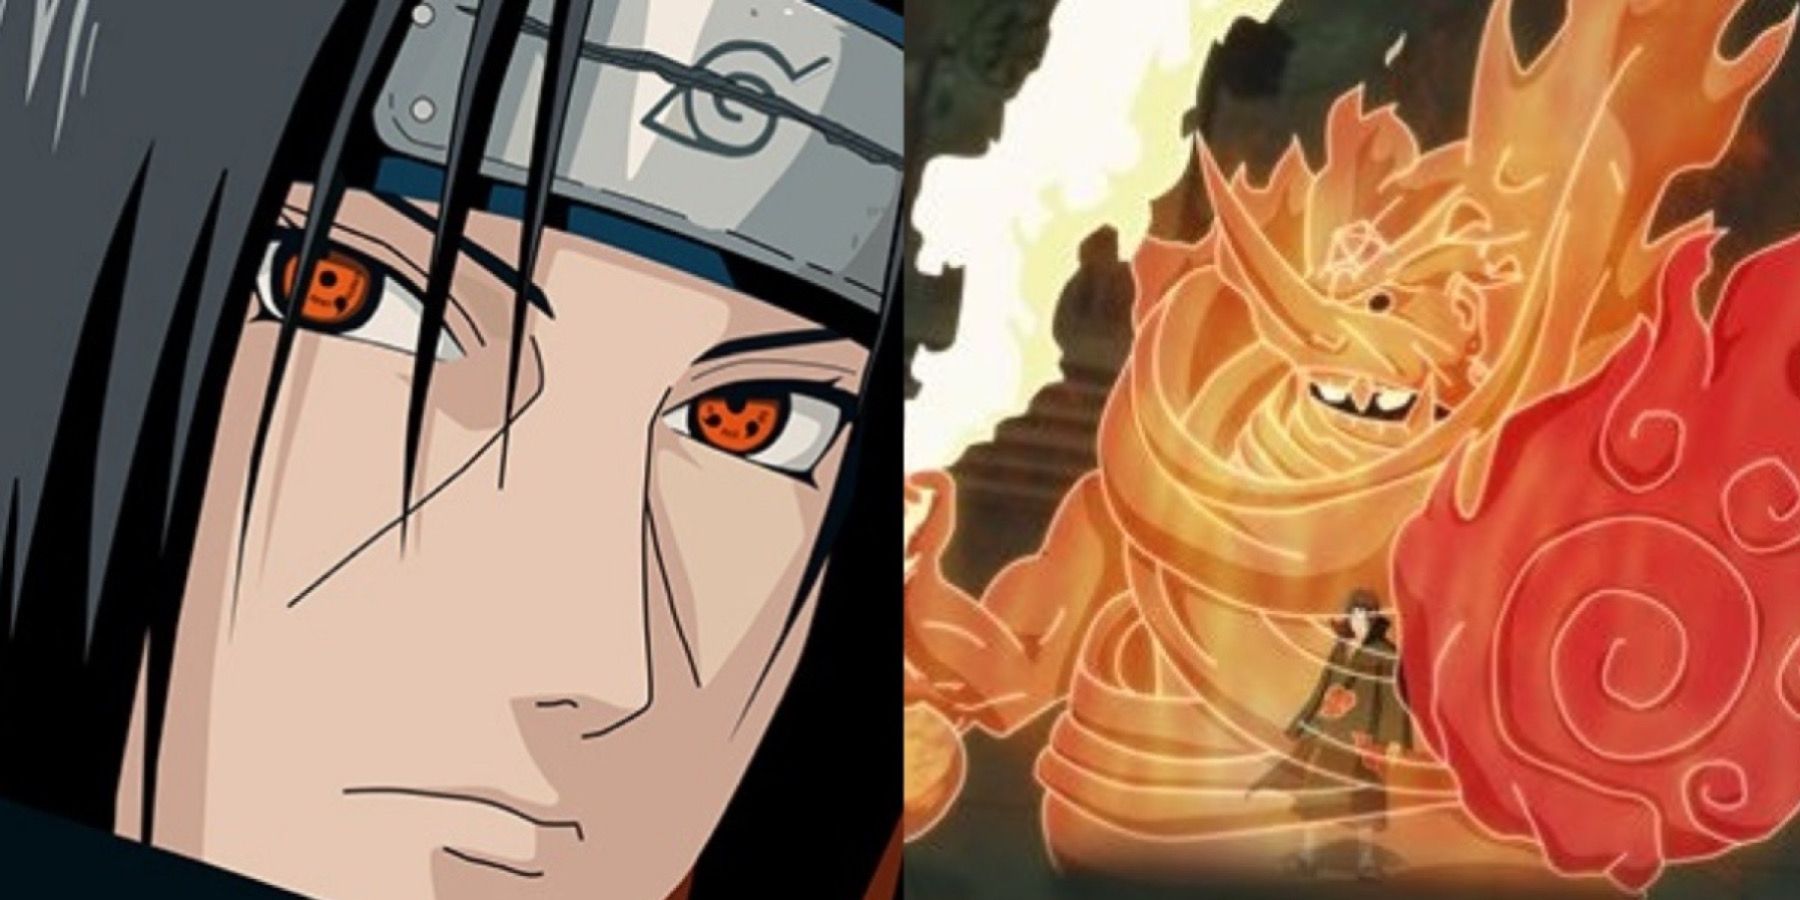 Itachi's Ethereal Weapons naruto